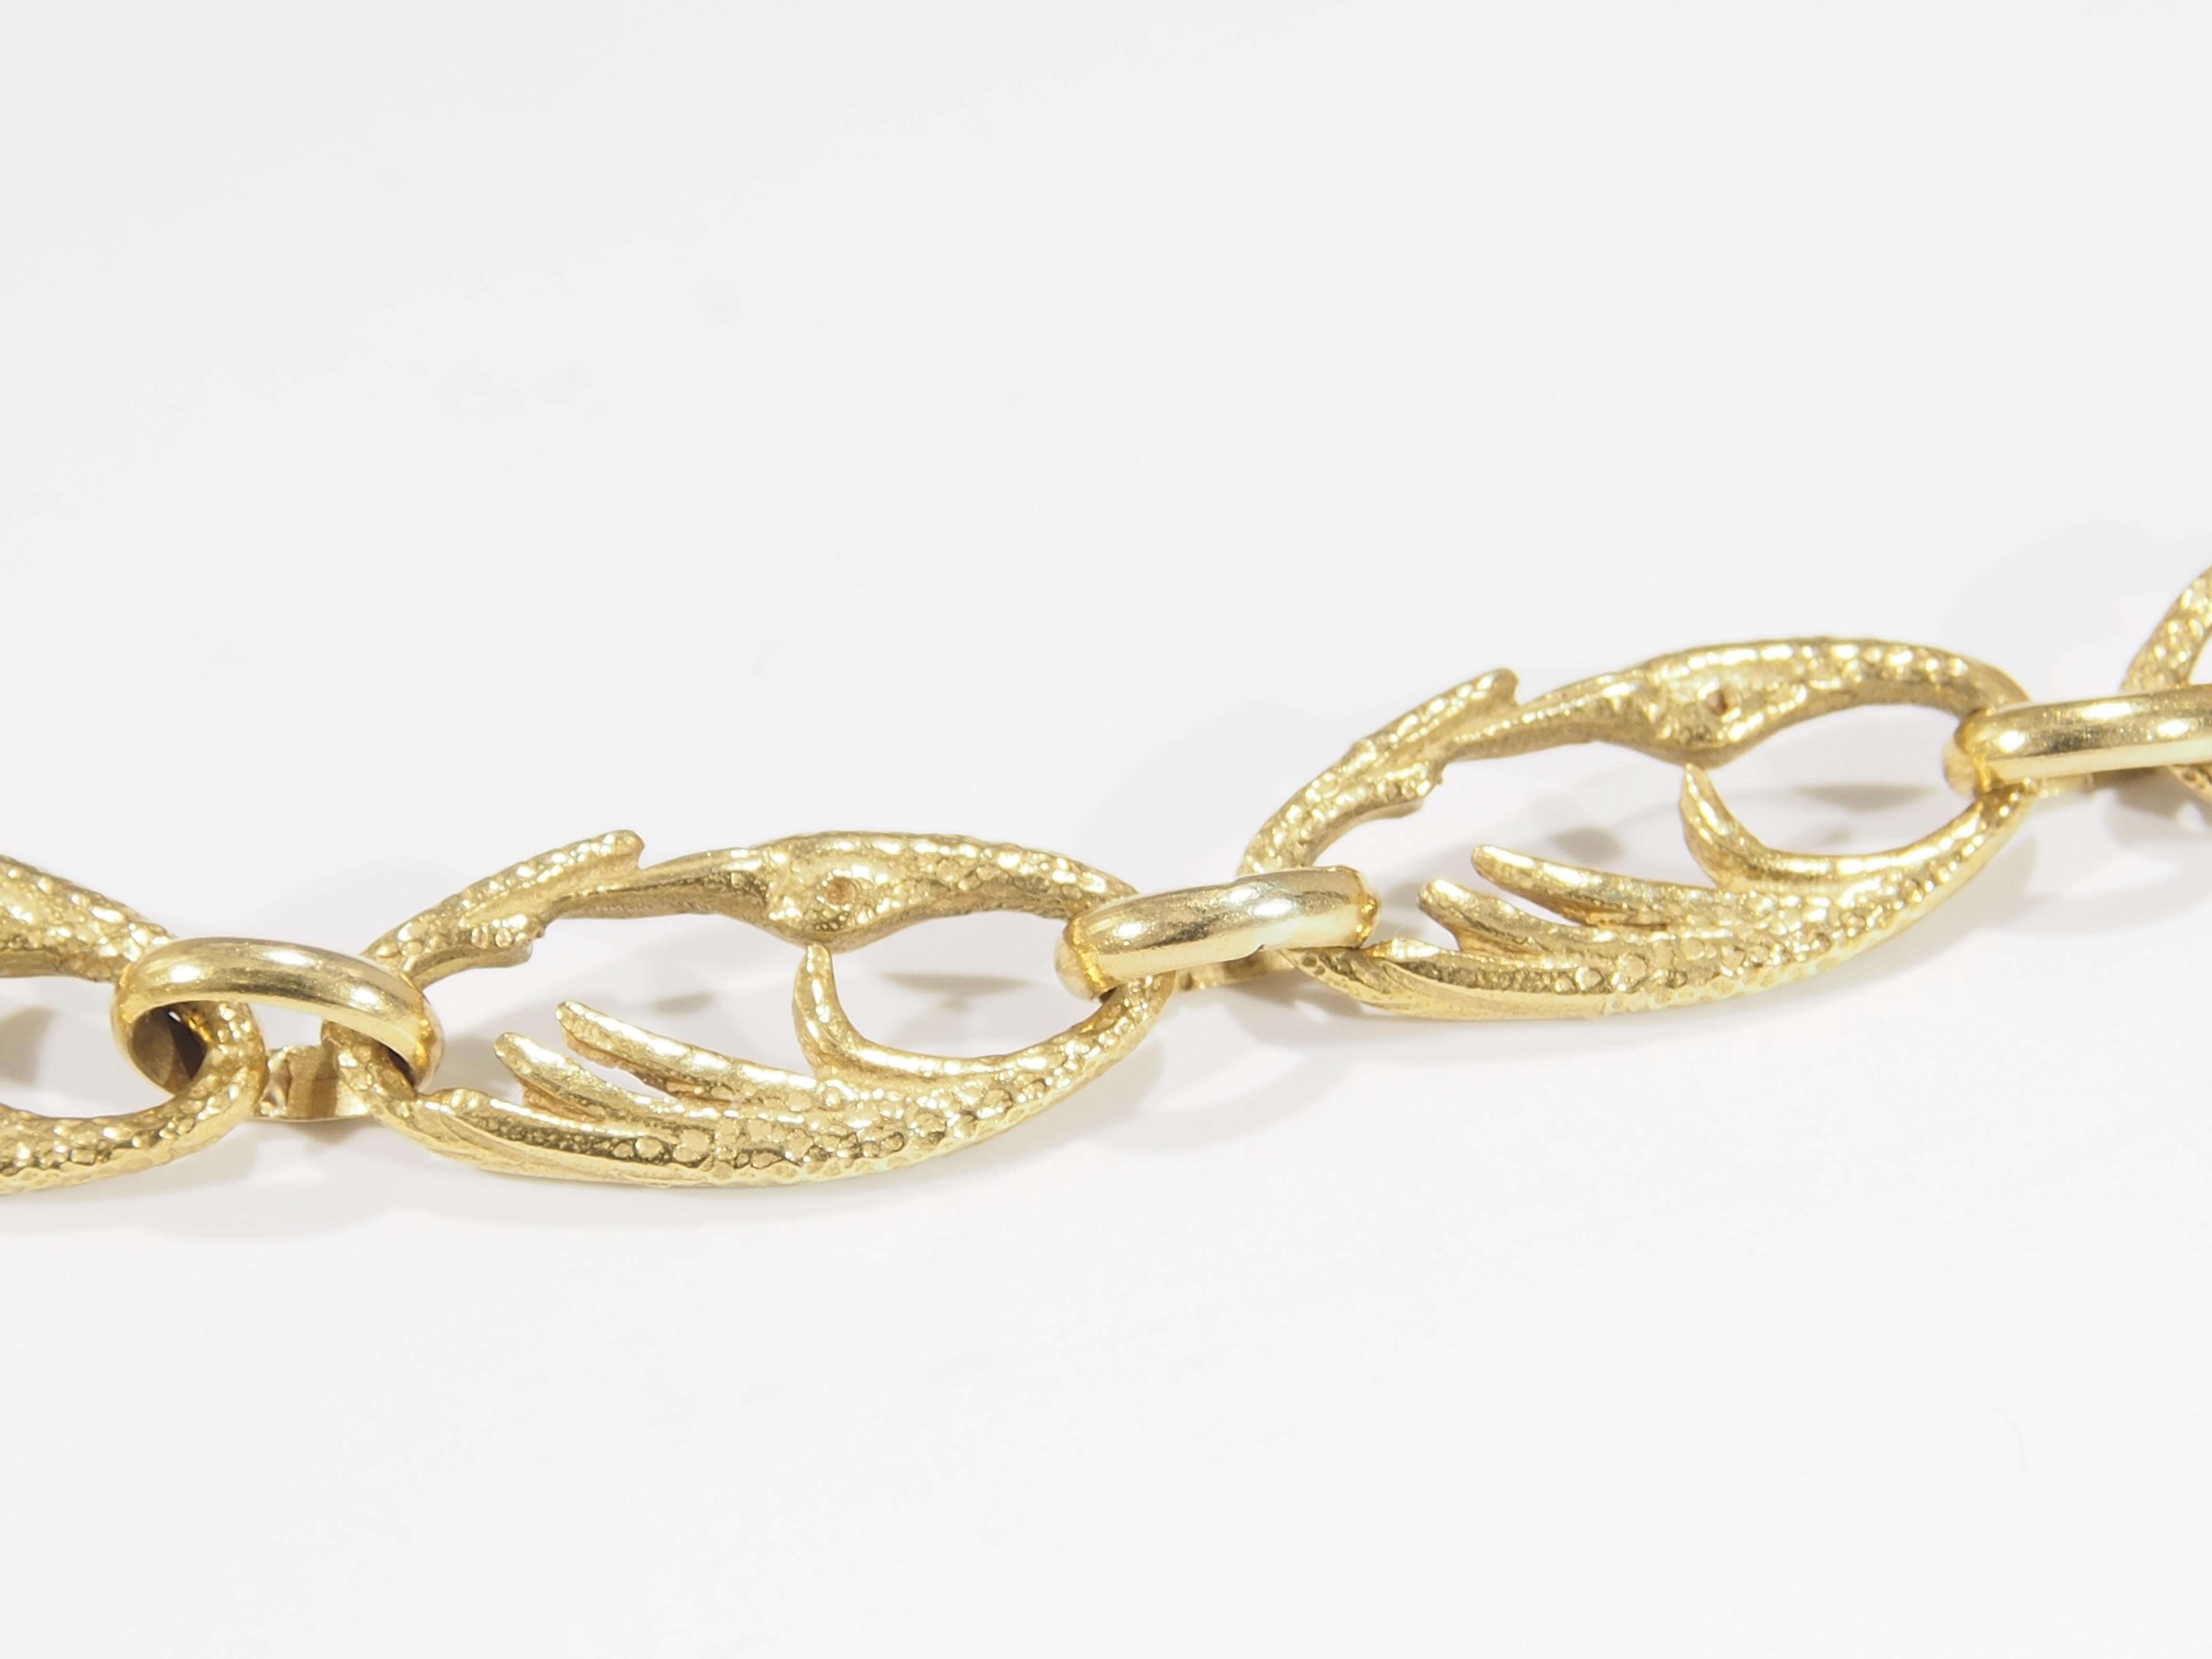 This is a stunning Vintage Cartier Link Necklace handcrafted in 18K Yellow Gold. The Necklace design consists of stylized links in the shape of joined Swans that are 1/4 of an inch in width, for a total of 30 inches in length. There are hallmarks of